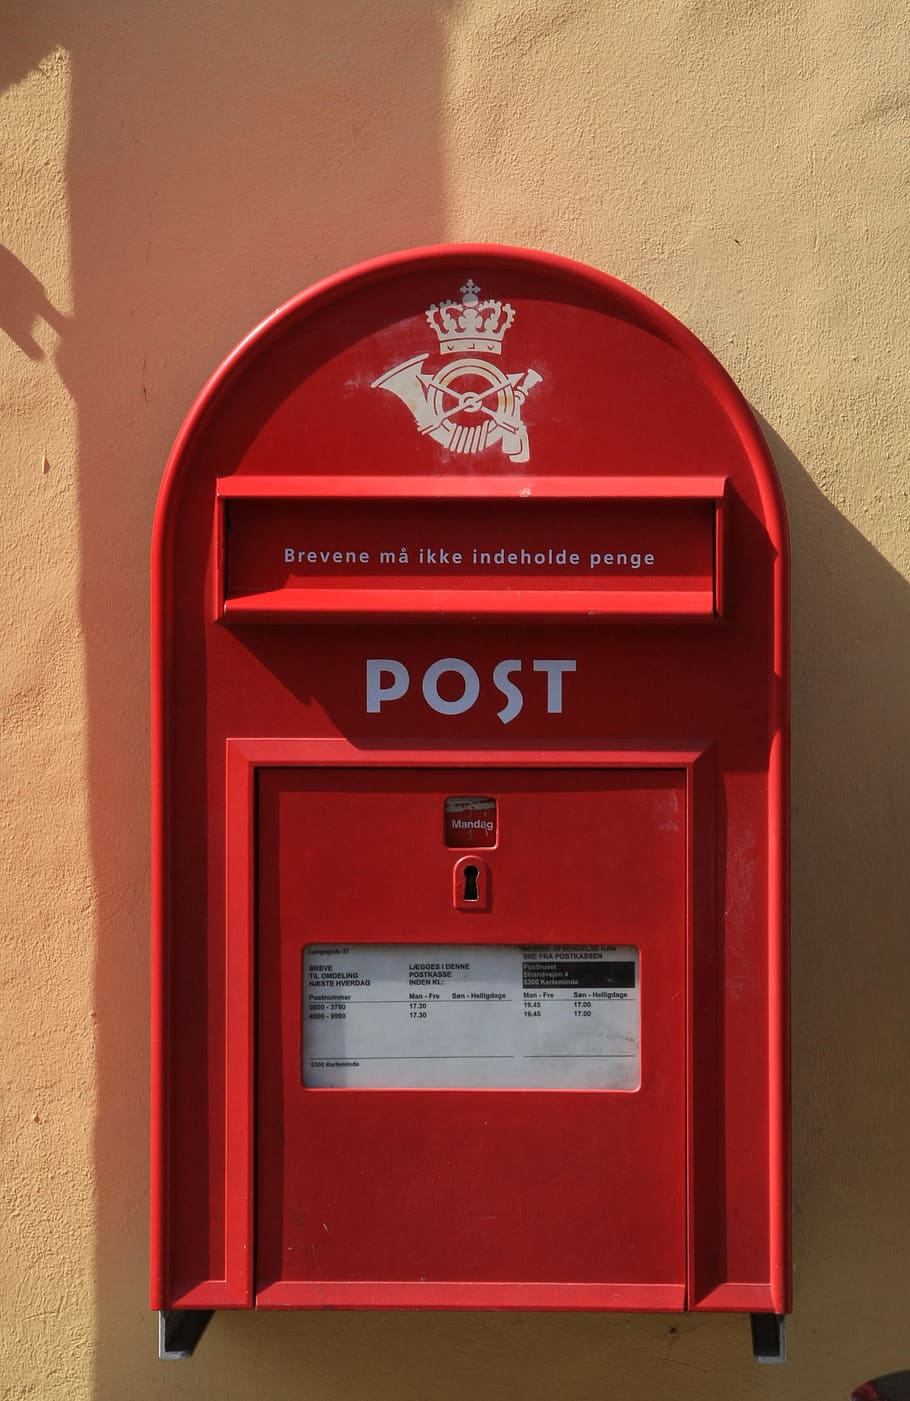 Postbox, Mail, Mailbox, Post, Box, red, letter, letterbox, postal